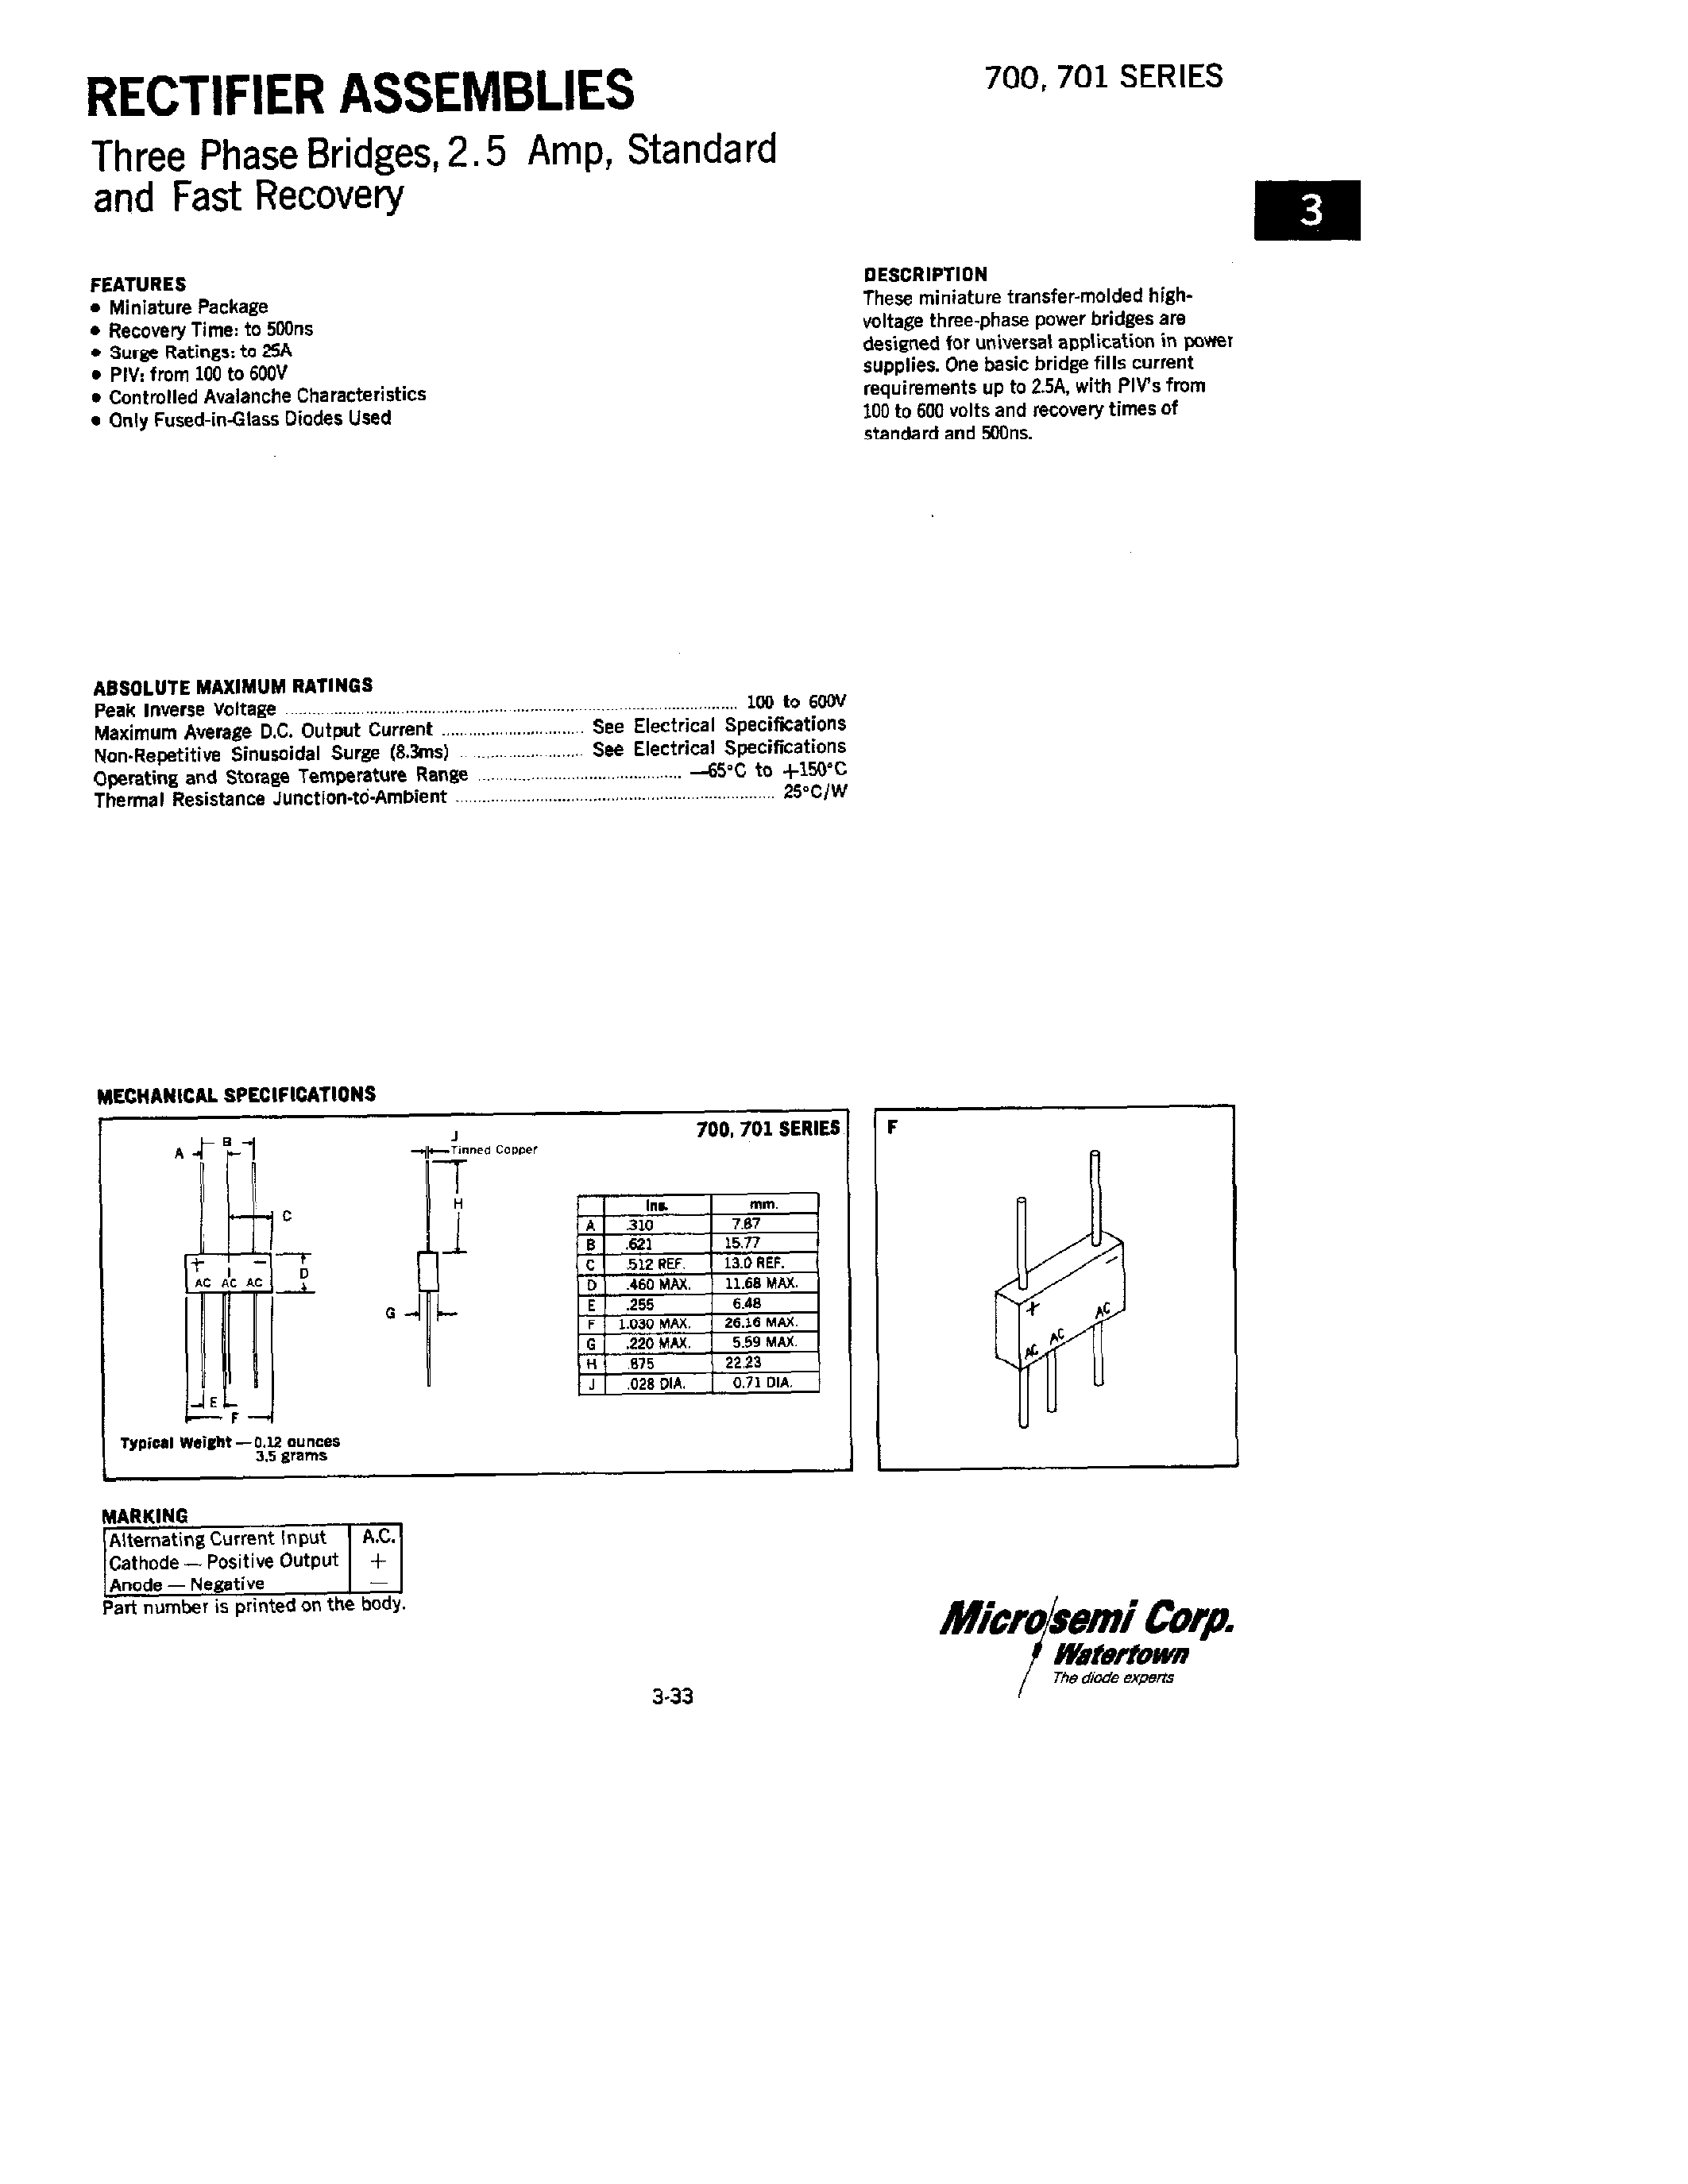 Datasheet 701-5 - RECTIFIERS ASSEMBLIES THREE PHASE BRIDGES/ 2.5 AMP/ STANDARD AND FAST RECOVERY page 1